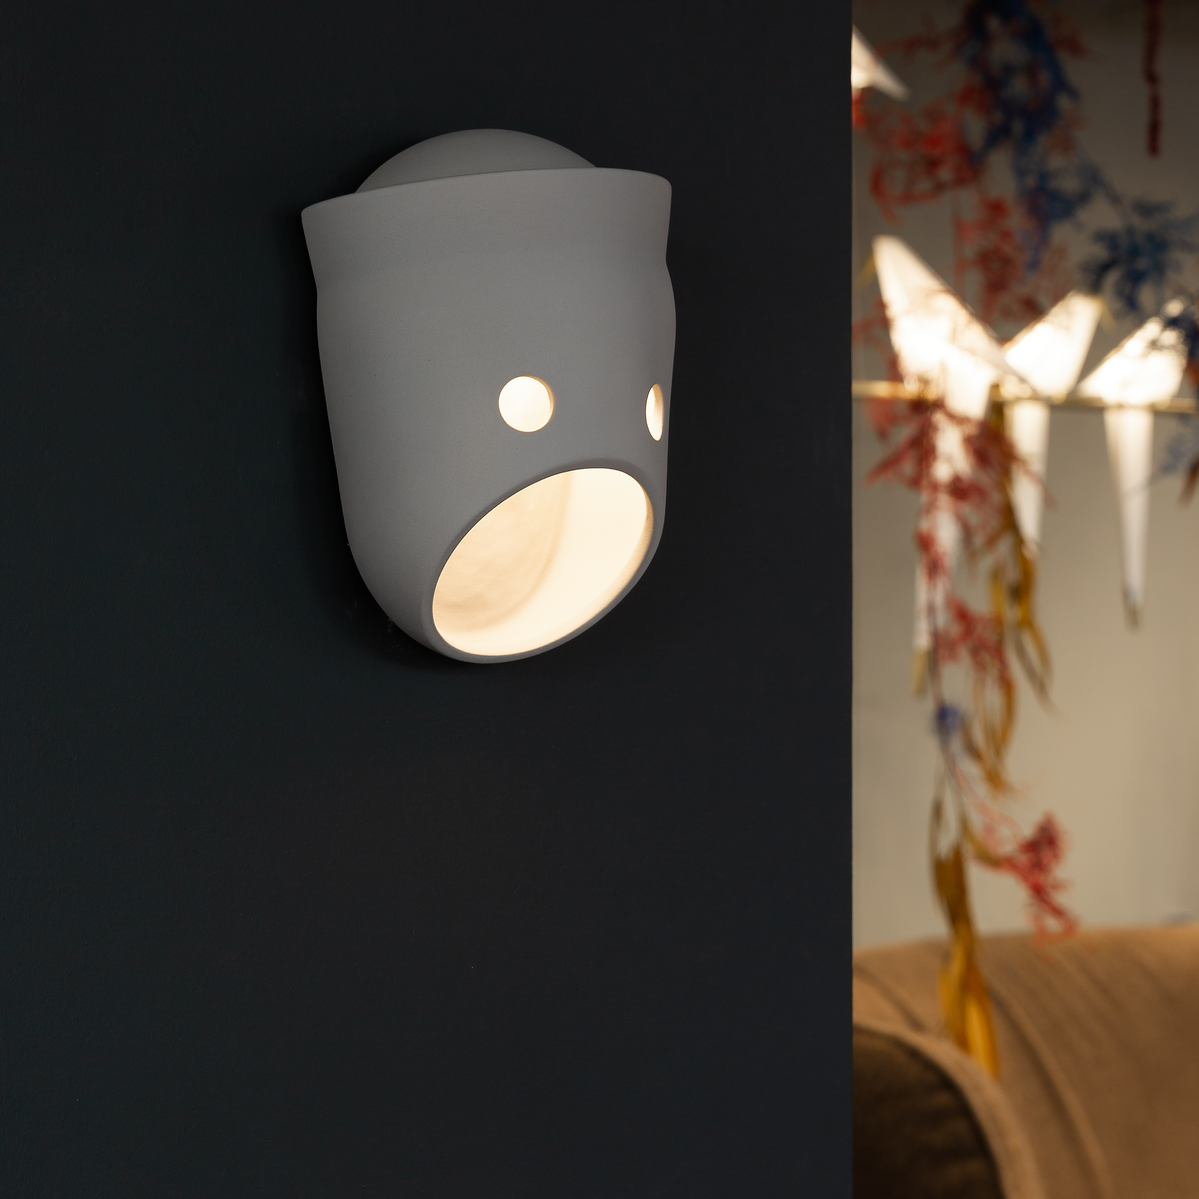 The Party Wall Lamp